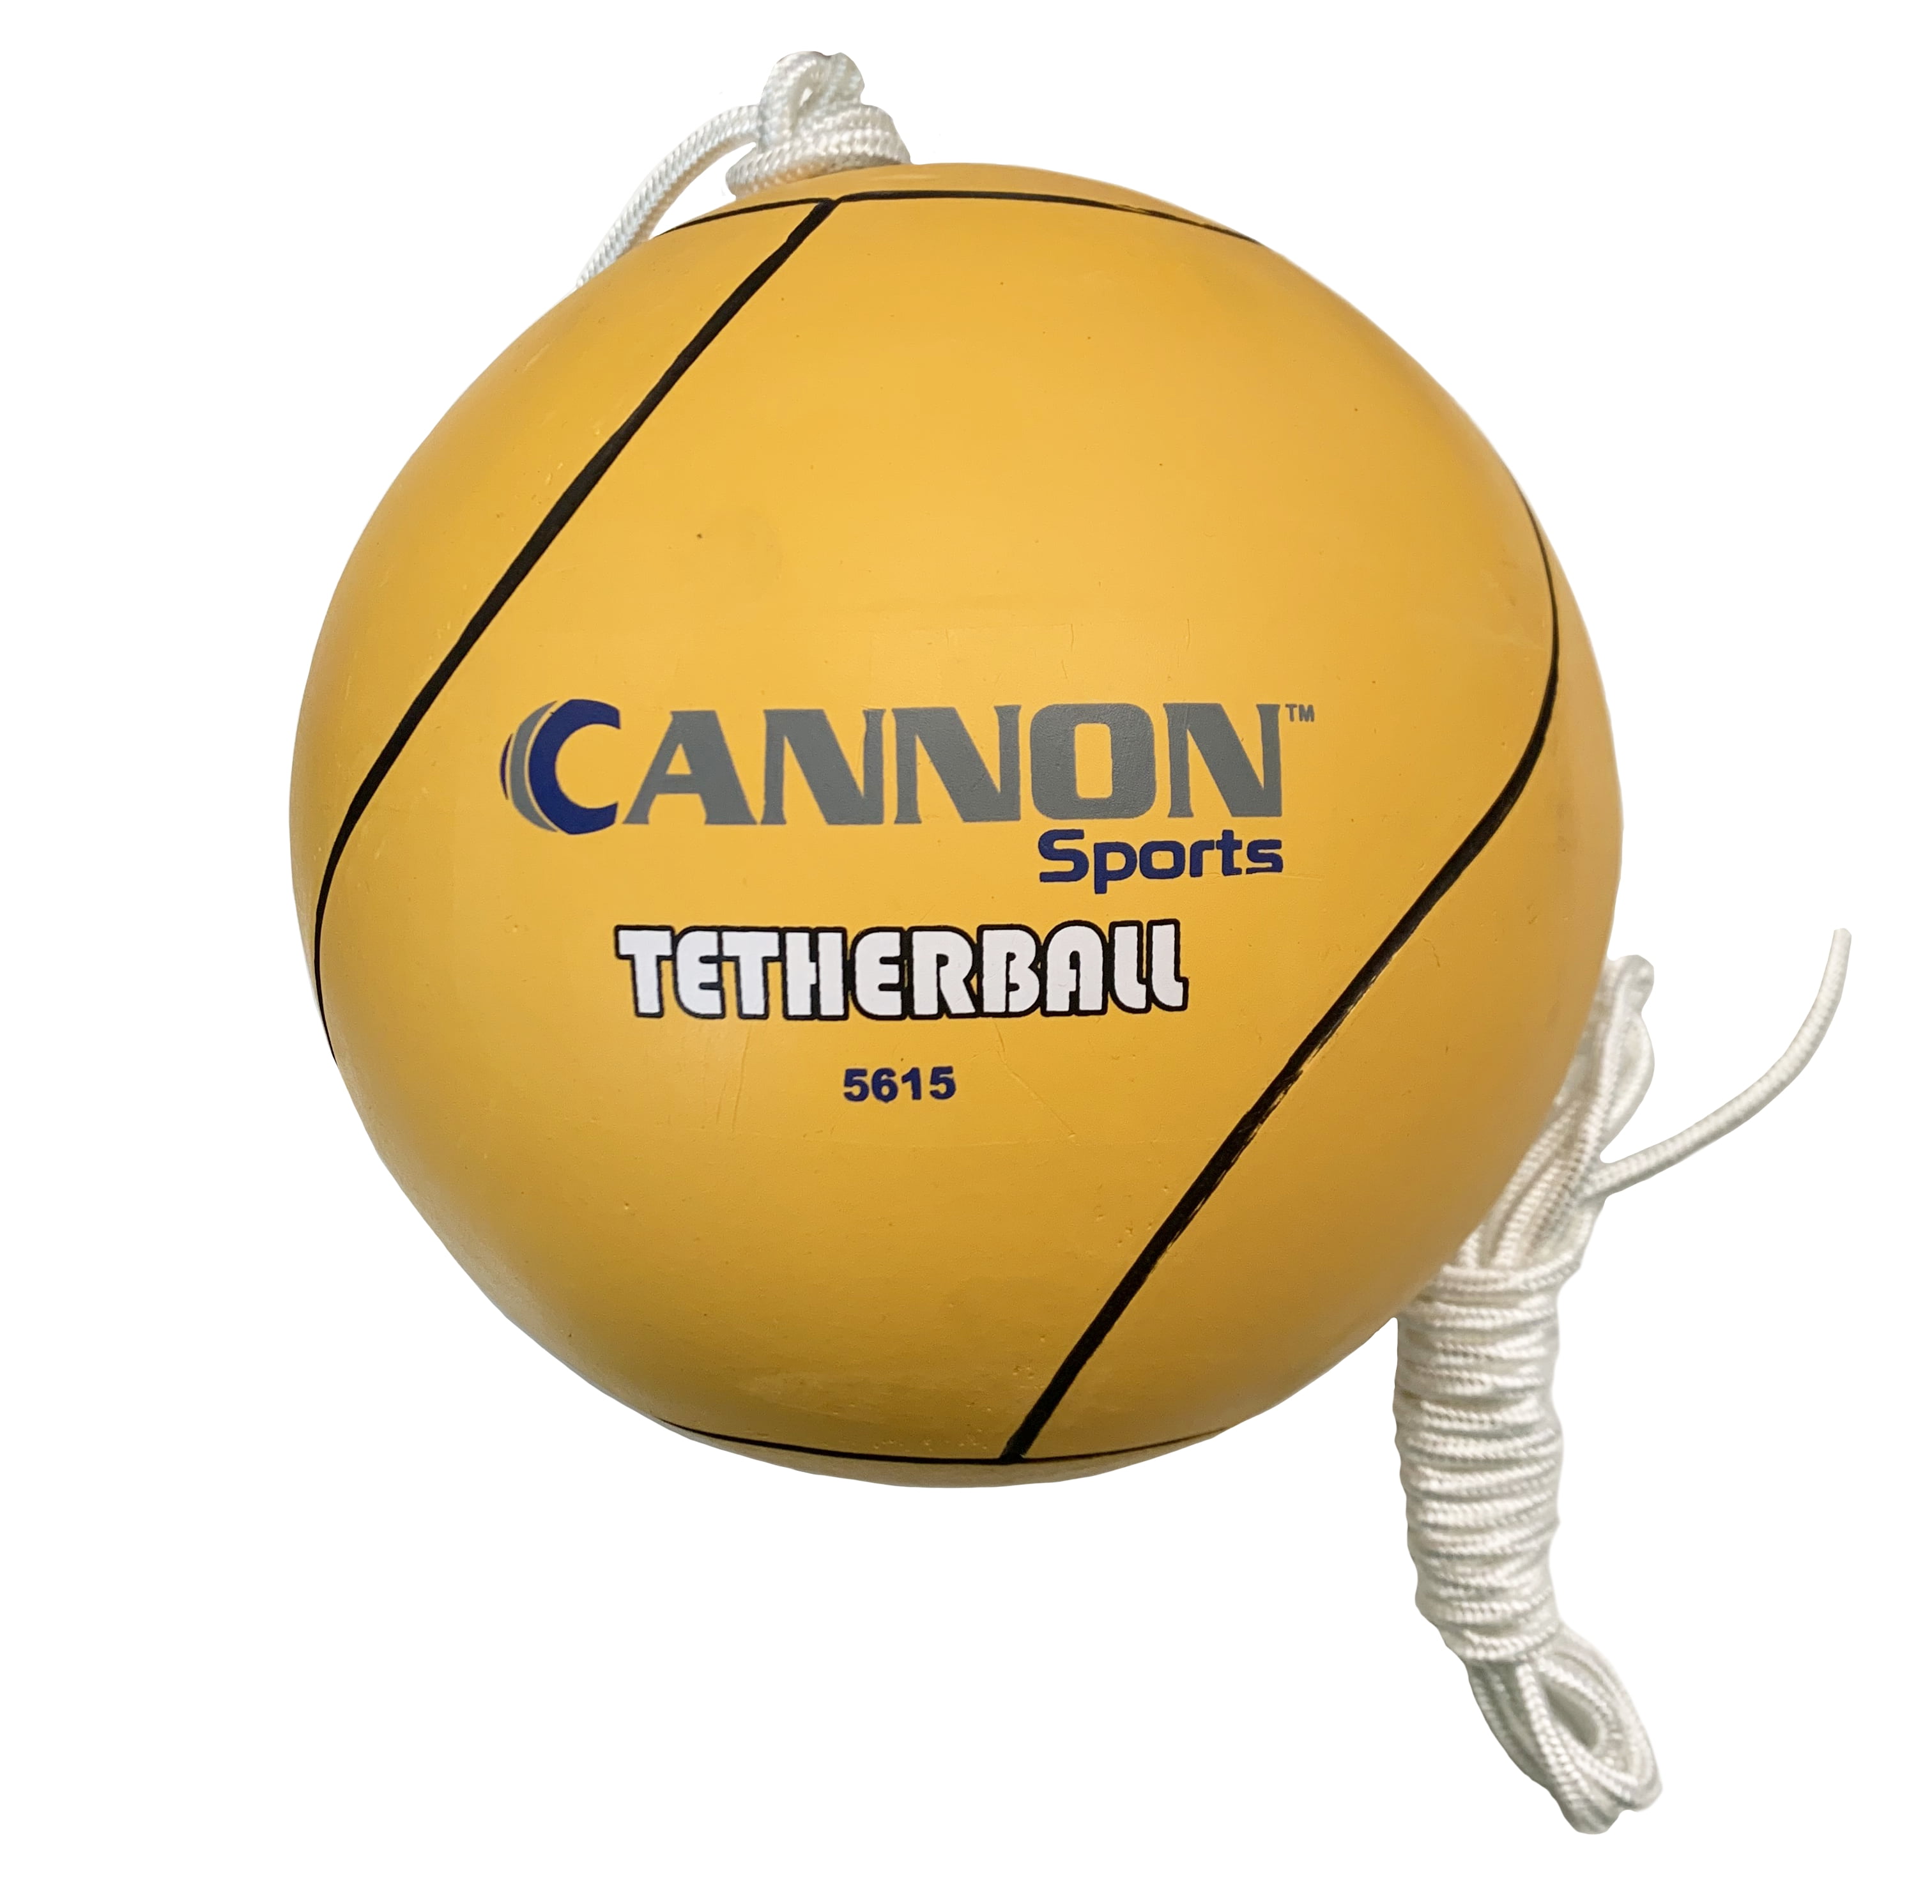 Cannon Sports Tetherball and Rope Set for School Playground, Backyards,  Recess, & Kids (Yellow) 